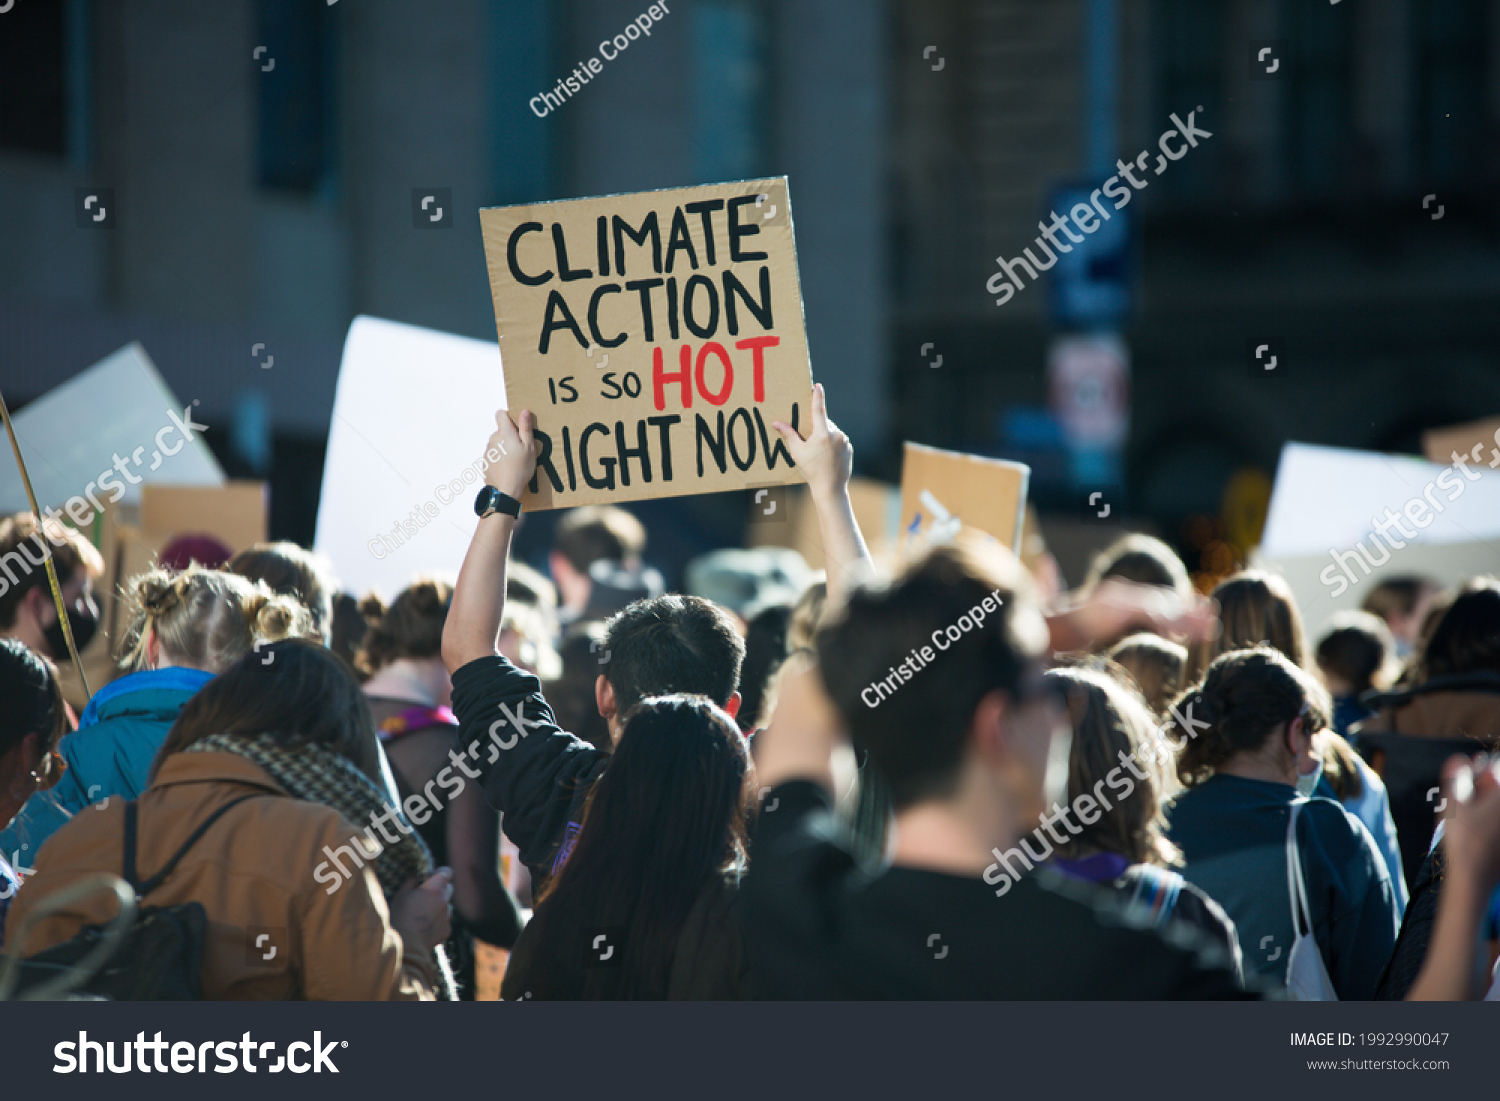 "Climate Action is so hot right now" text written on a sign at student climate change protest in Melbourne Australia. Group of protesters marching down street against global warming. Focus on sign. #1992990047